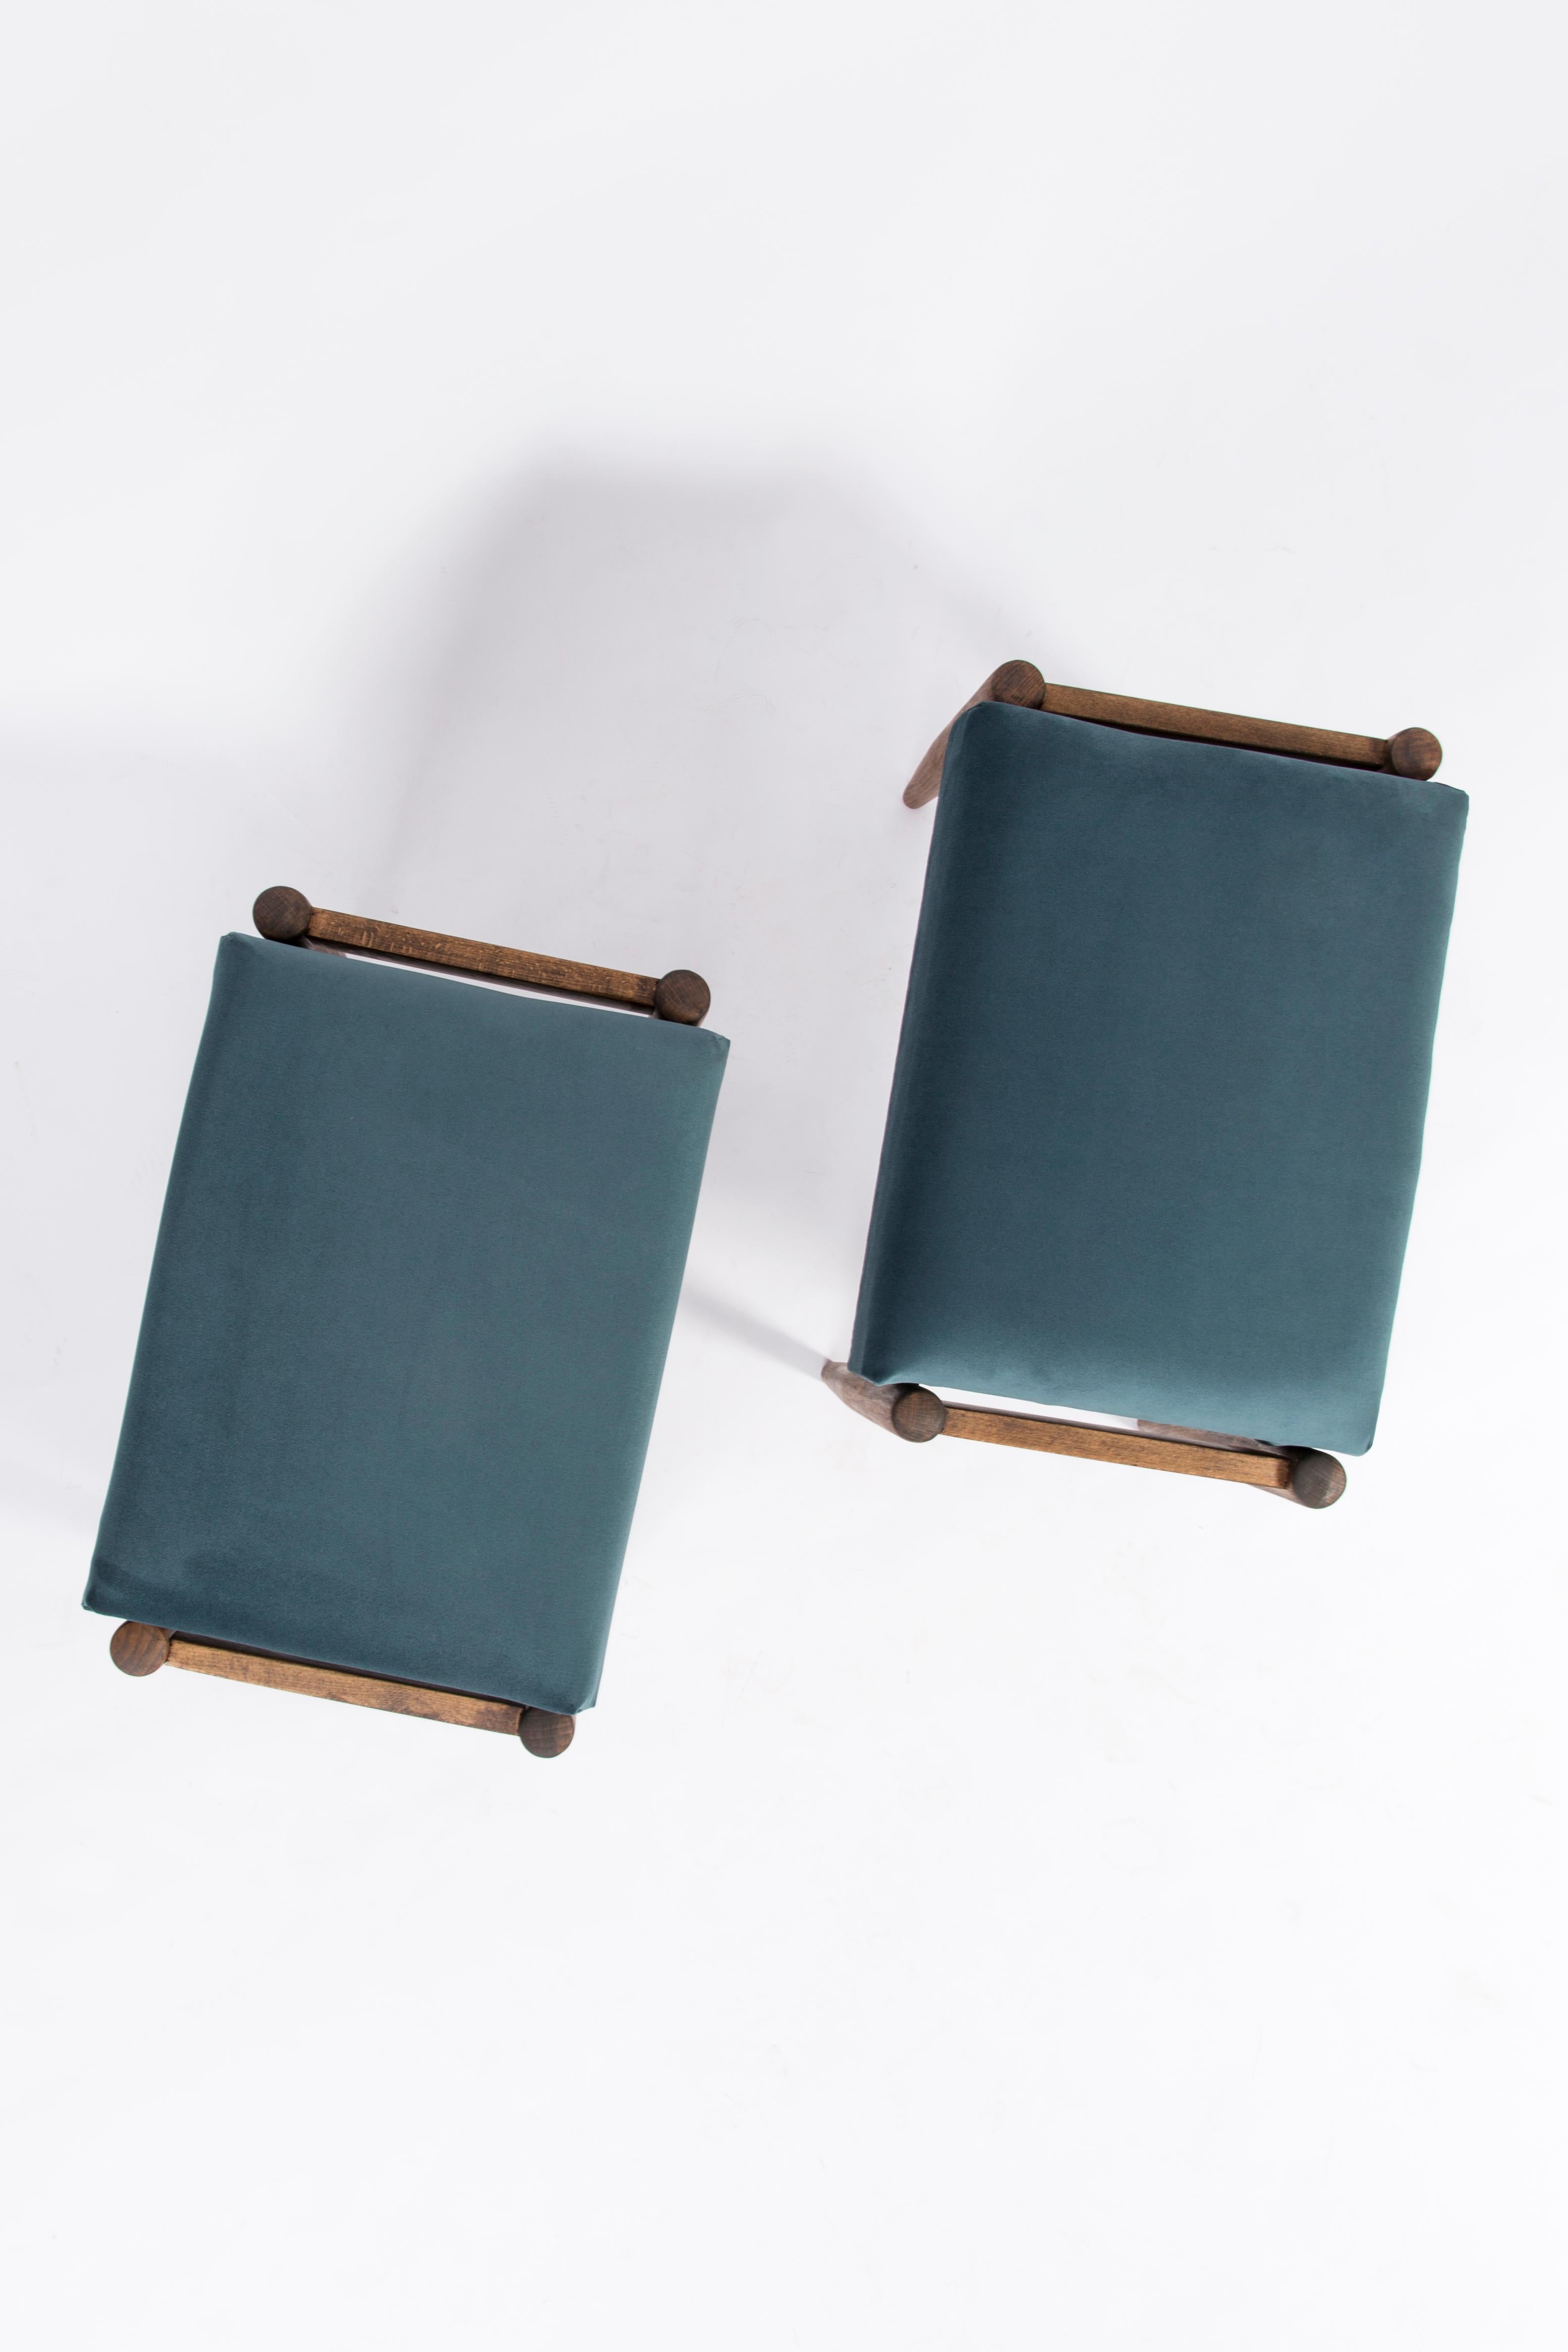 Set of Petrol Blue Vintage Armchair and Stool, Edmund Homa, 1960s For Sale 1